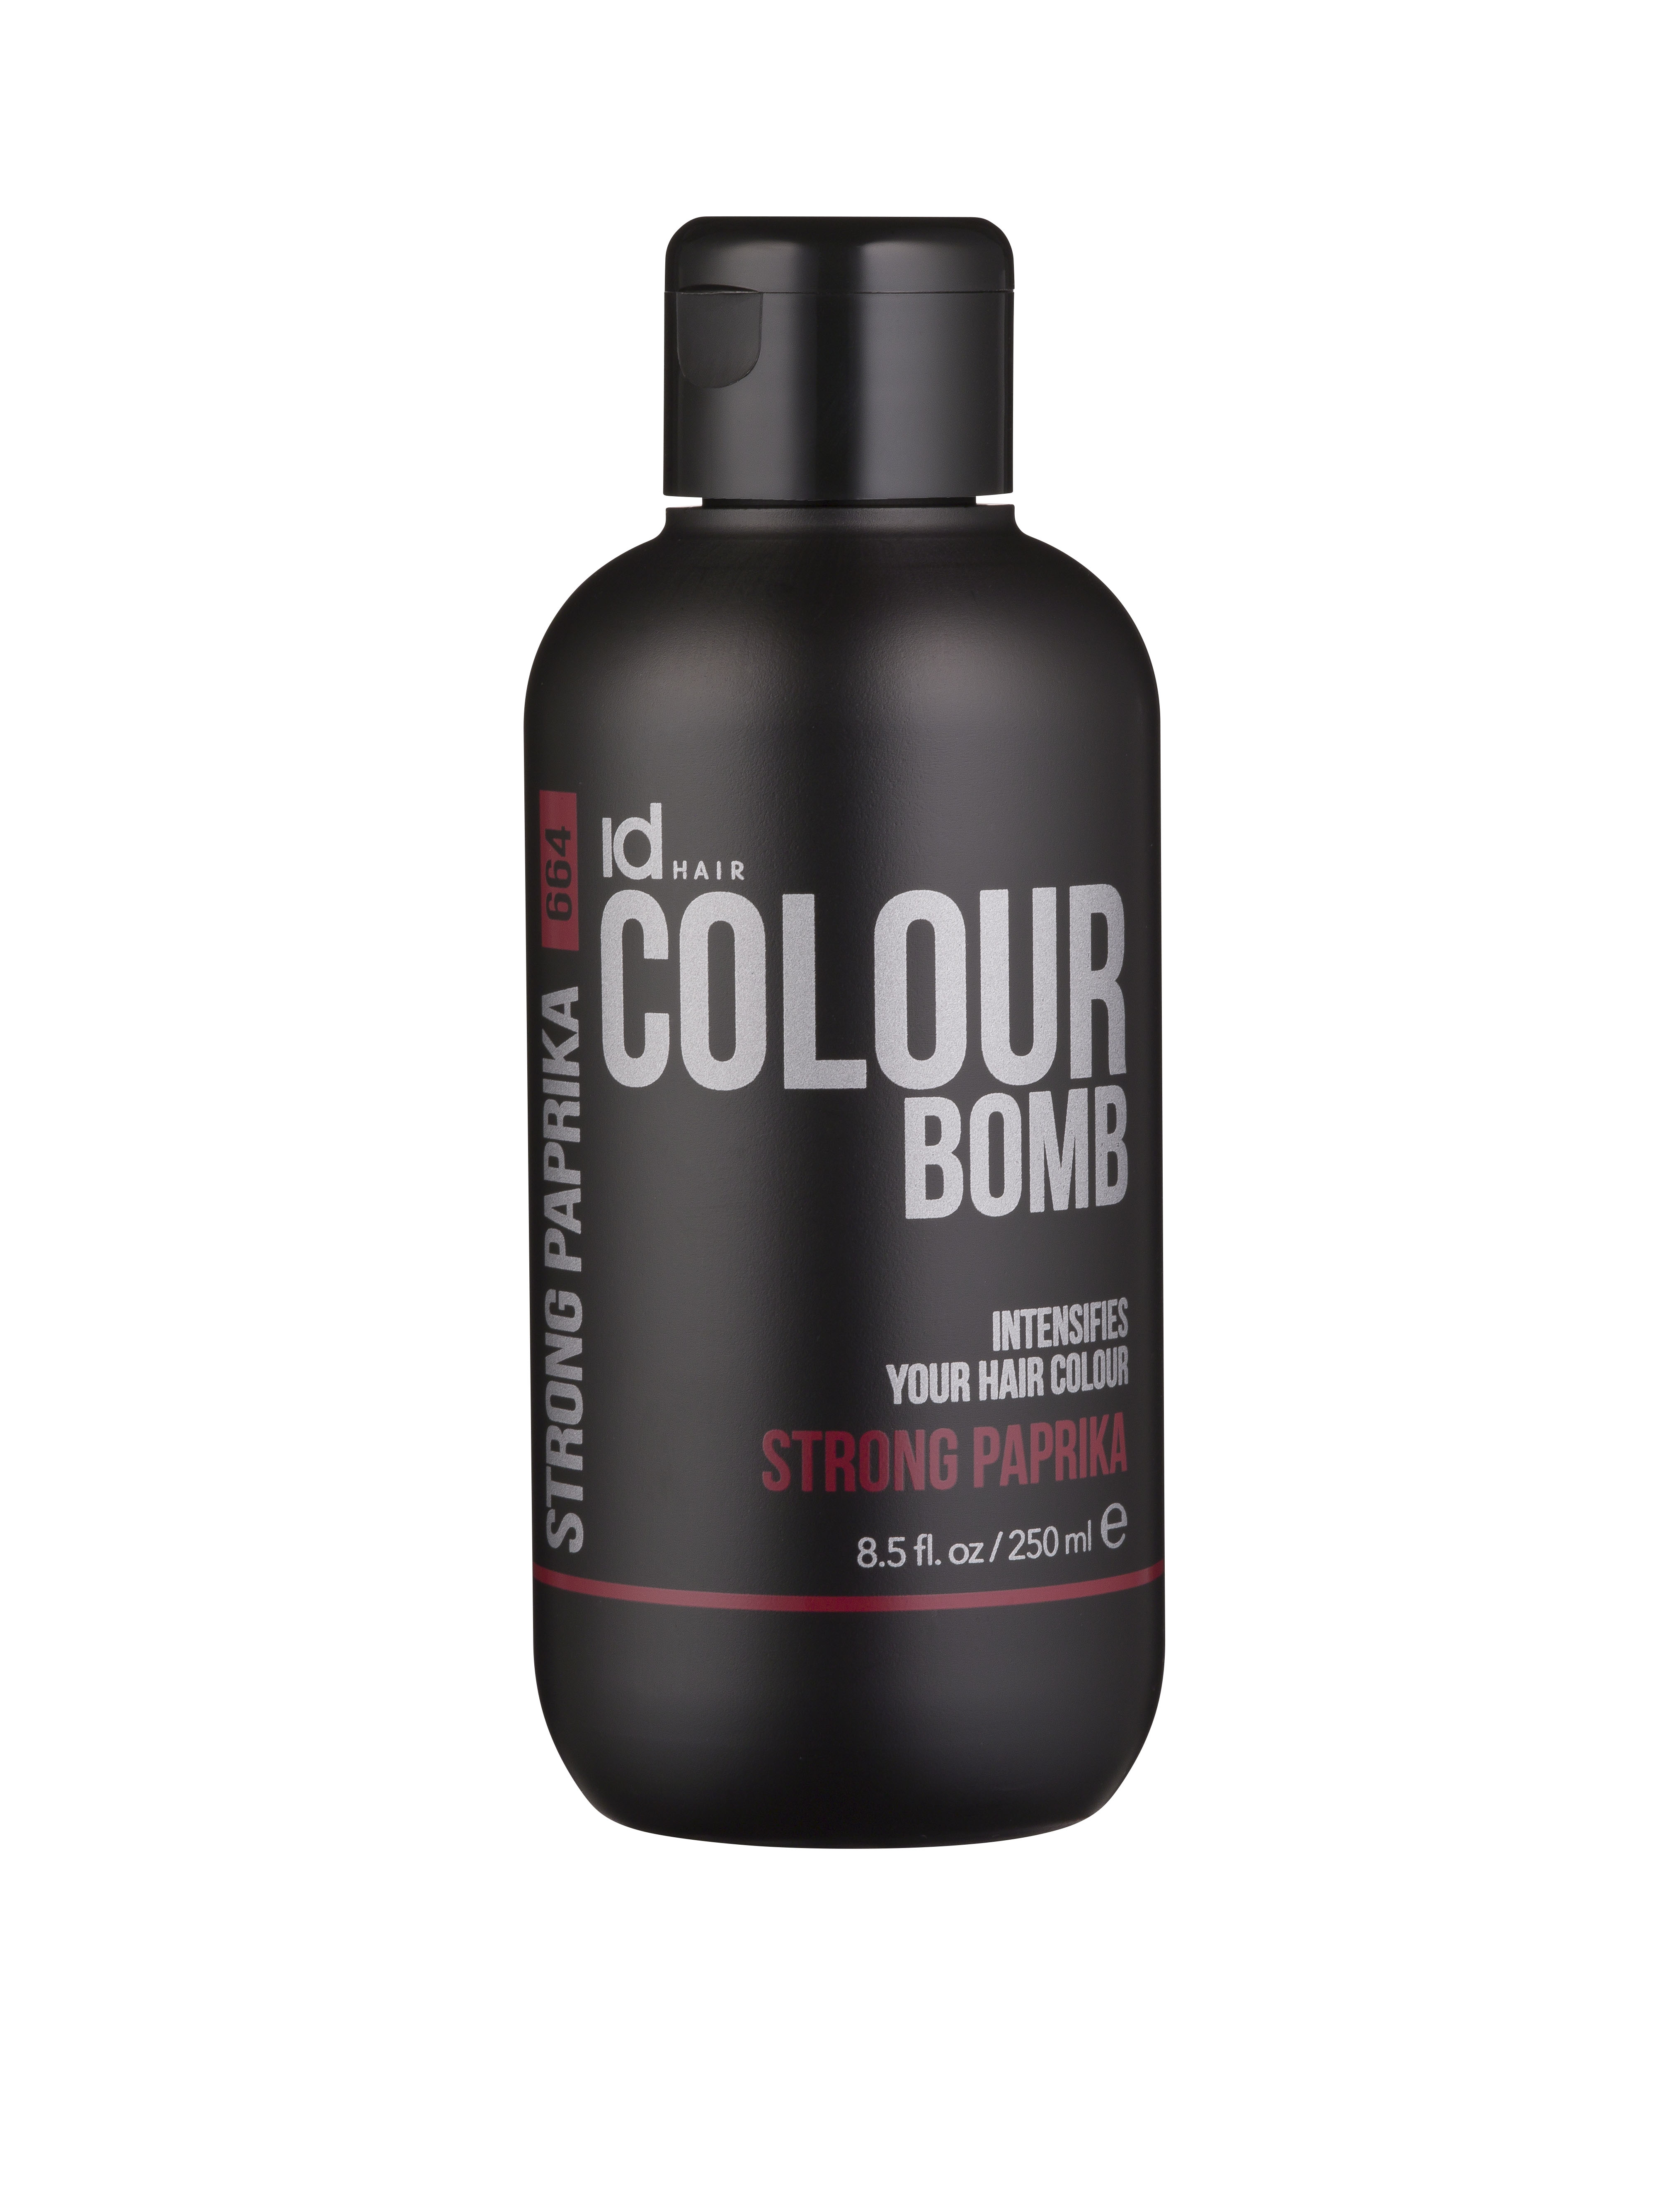 IdHAIR - Colour Bomb 250 ml - Strong Paprika